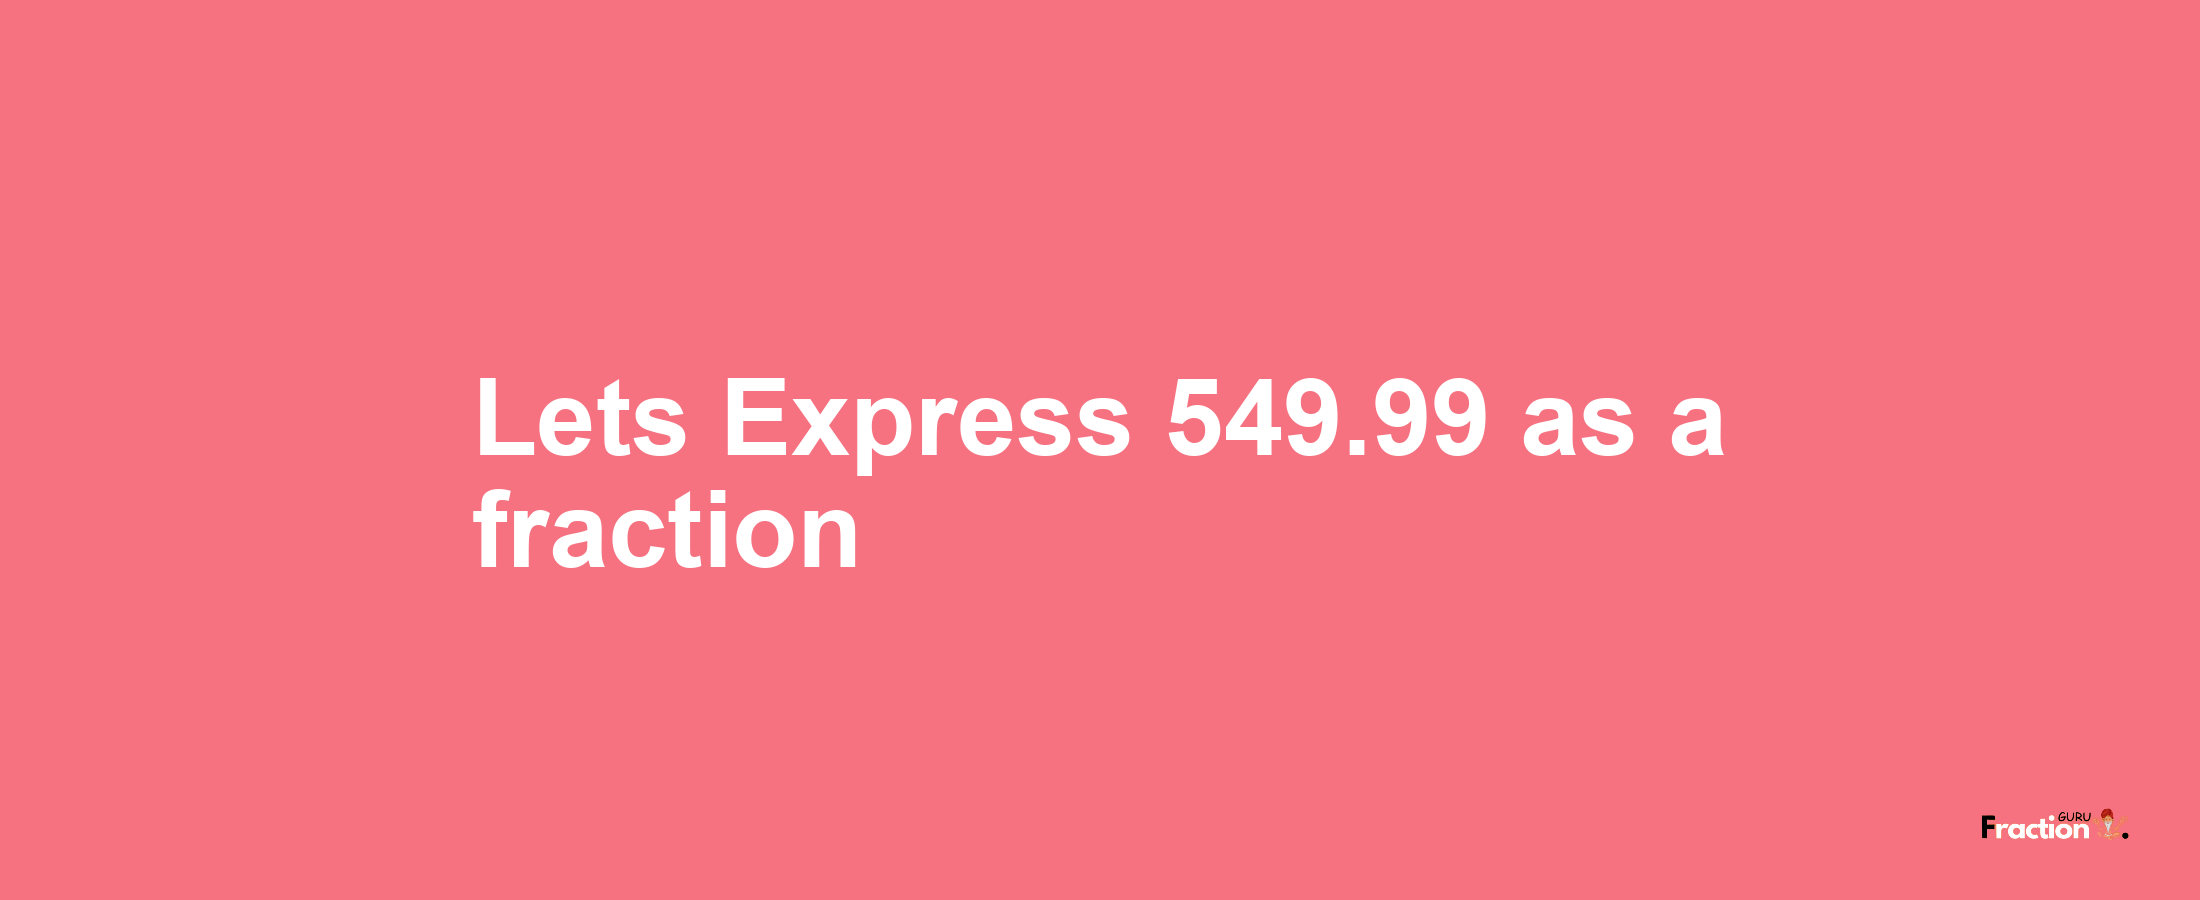 Lets Express 549.99 as afraction